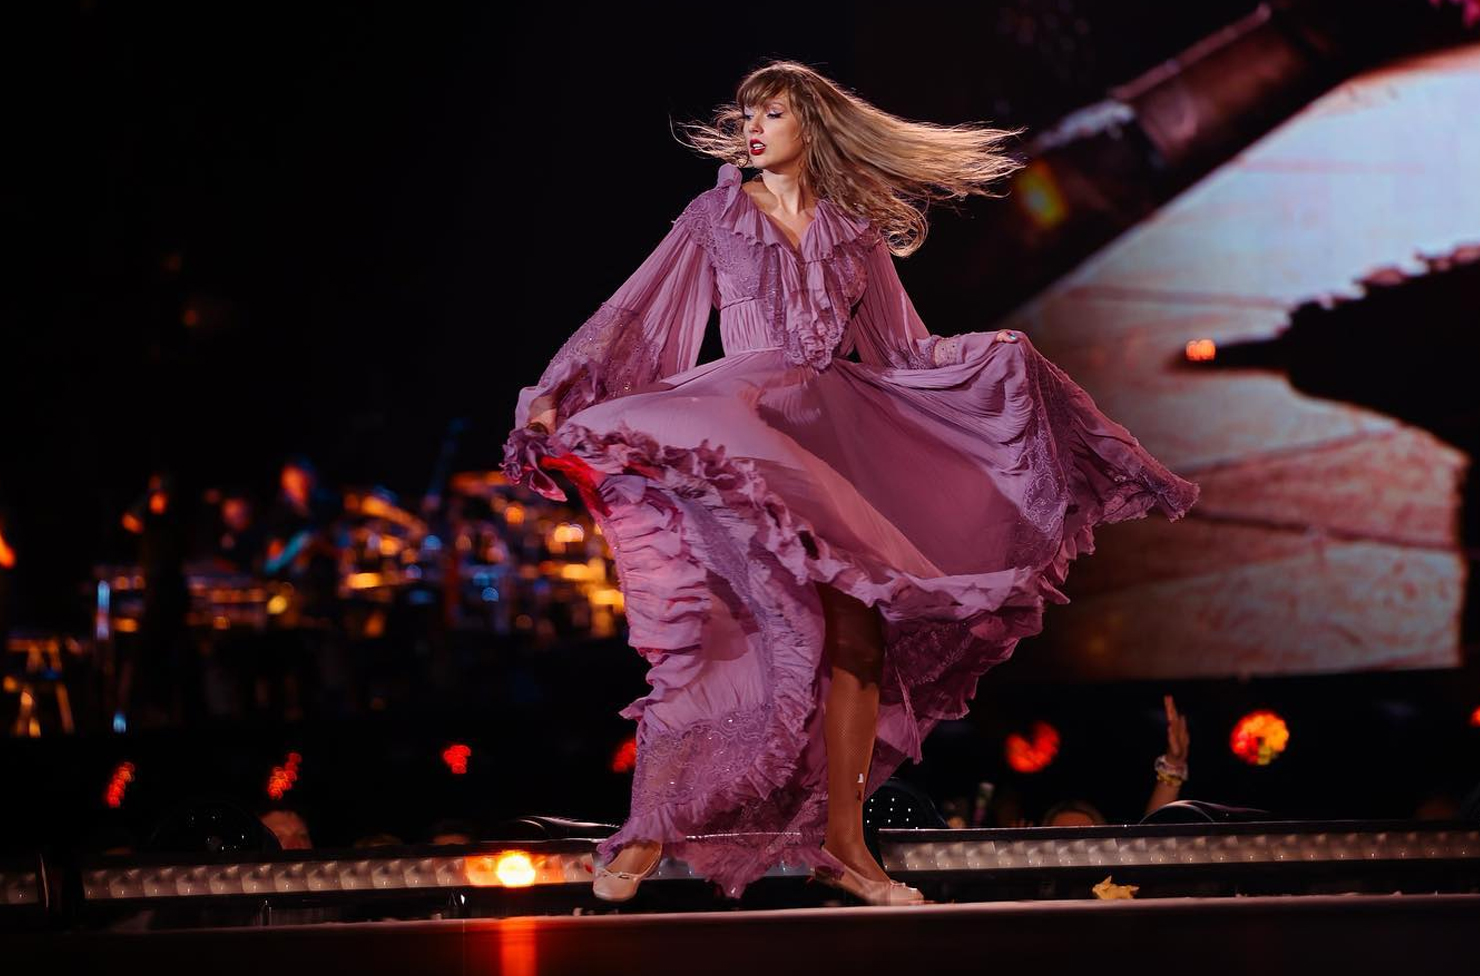 a person wearing a flowing dress on stage